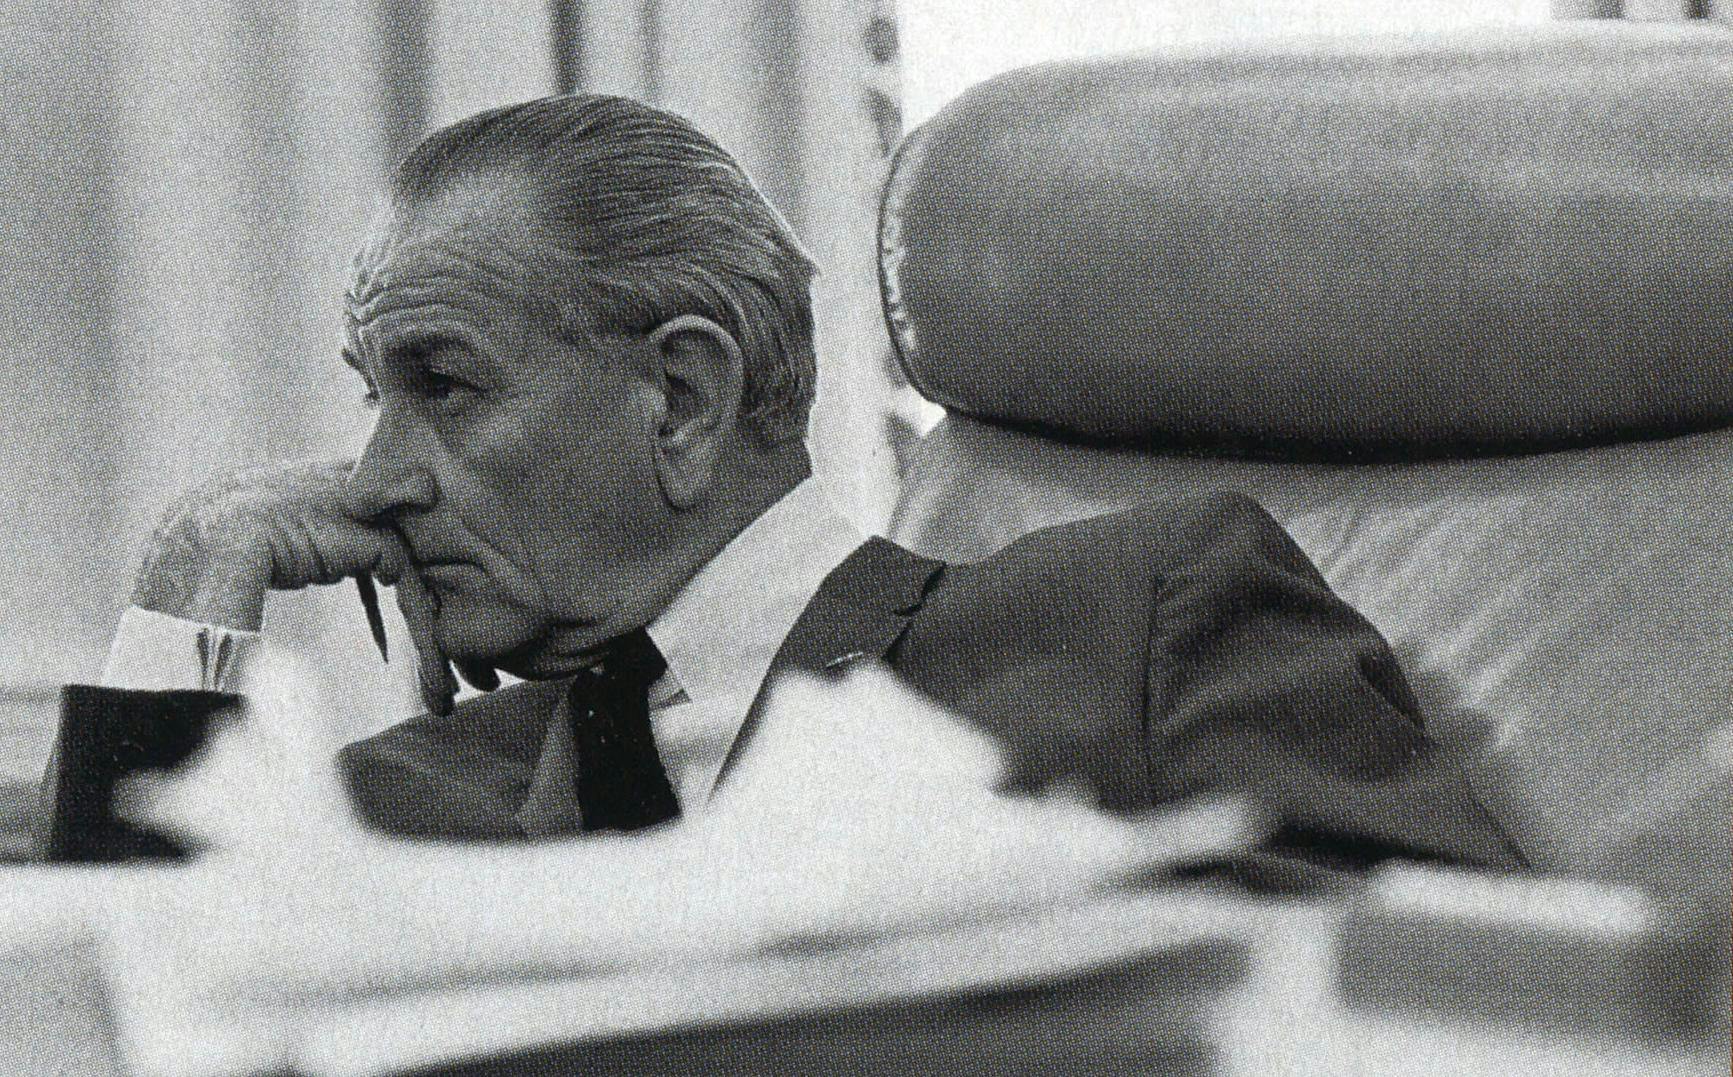 By 1968 the Vietnam War had consumed Johnson's administration, but LBJ never doubted the policy of containment. "If we let the take Asia, they're going to try to take us. I think aggression must be deterred."